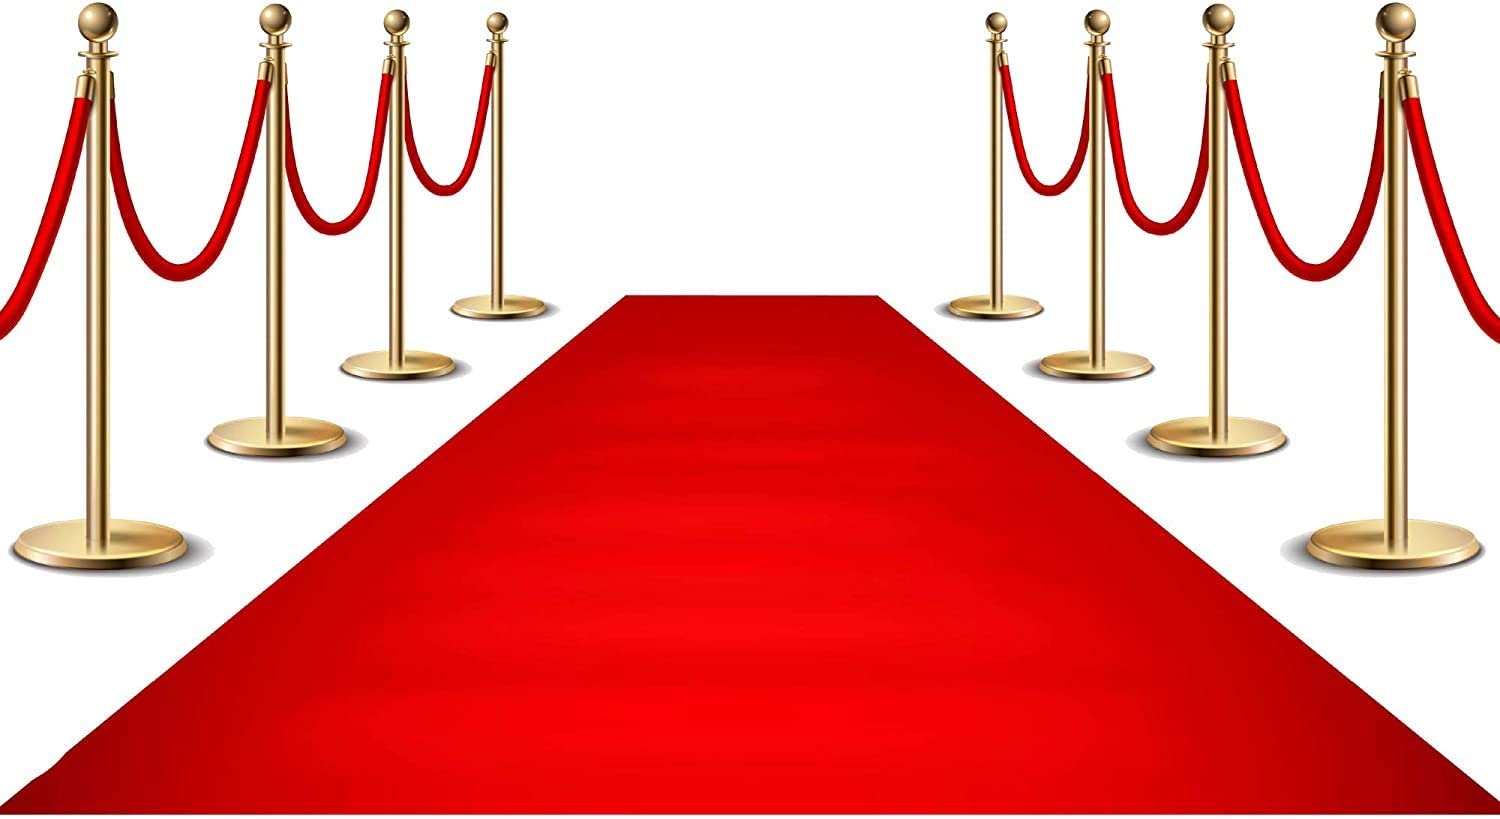 Aisle Runner Suitable for Indoor or Outdoor Party Decoration Red Runway Rug 40gsm Thickness 3 x 100 Feet Red Carpet Runner 